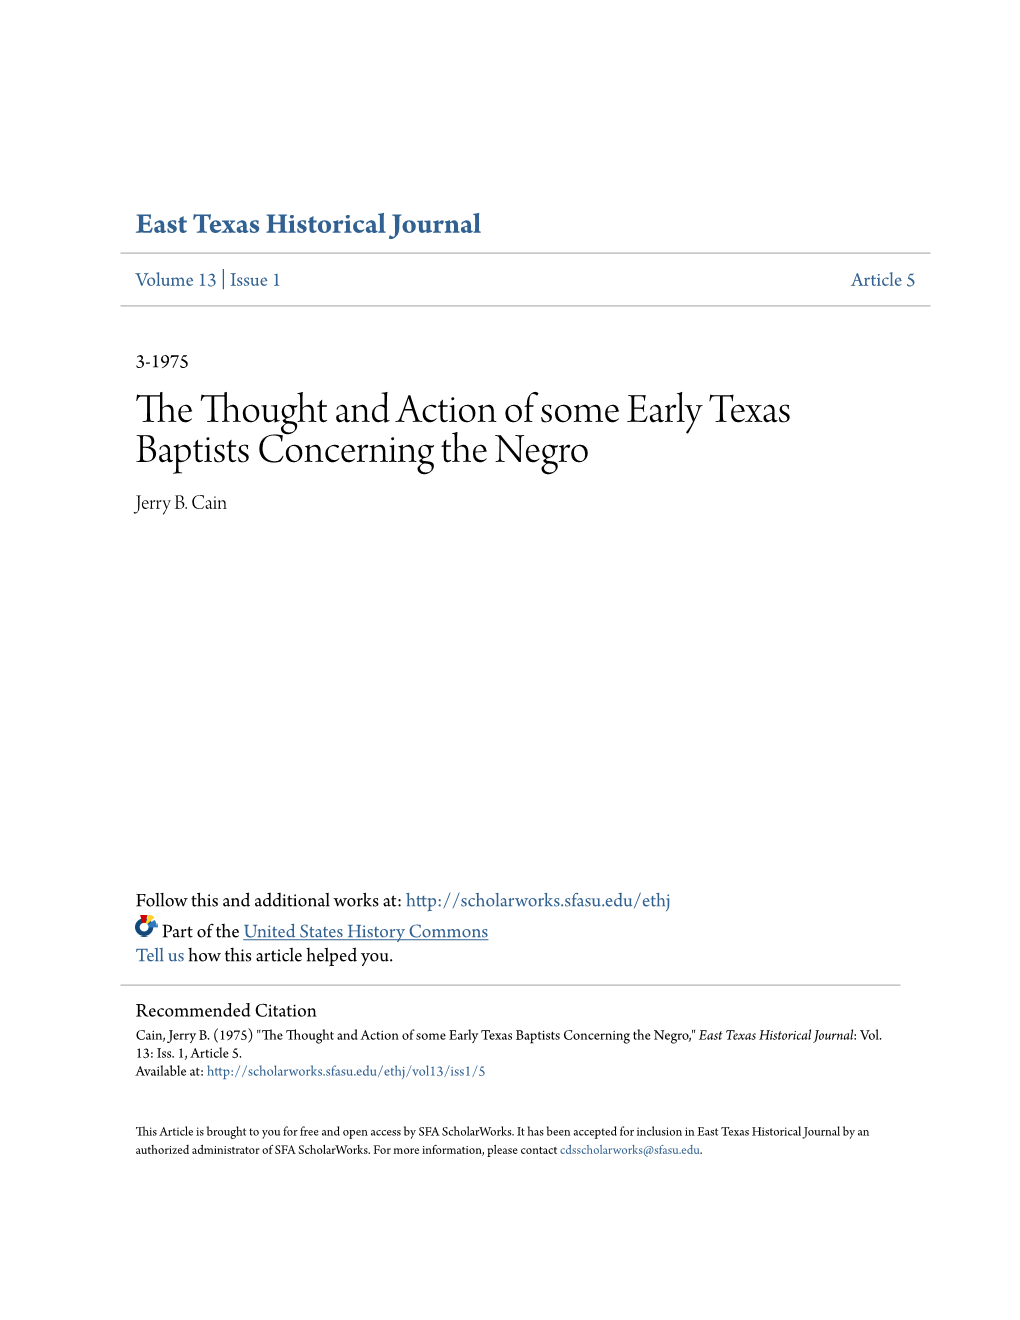 The Thought and Action of Some Early Texas Baptists Concerning the Negro Jerry B